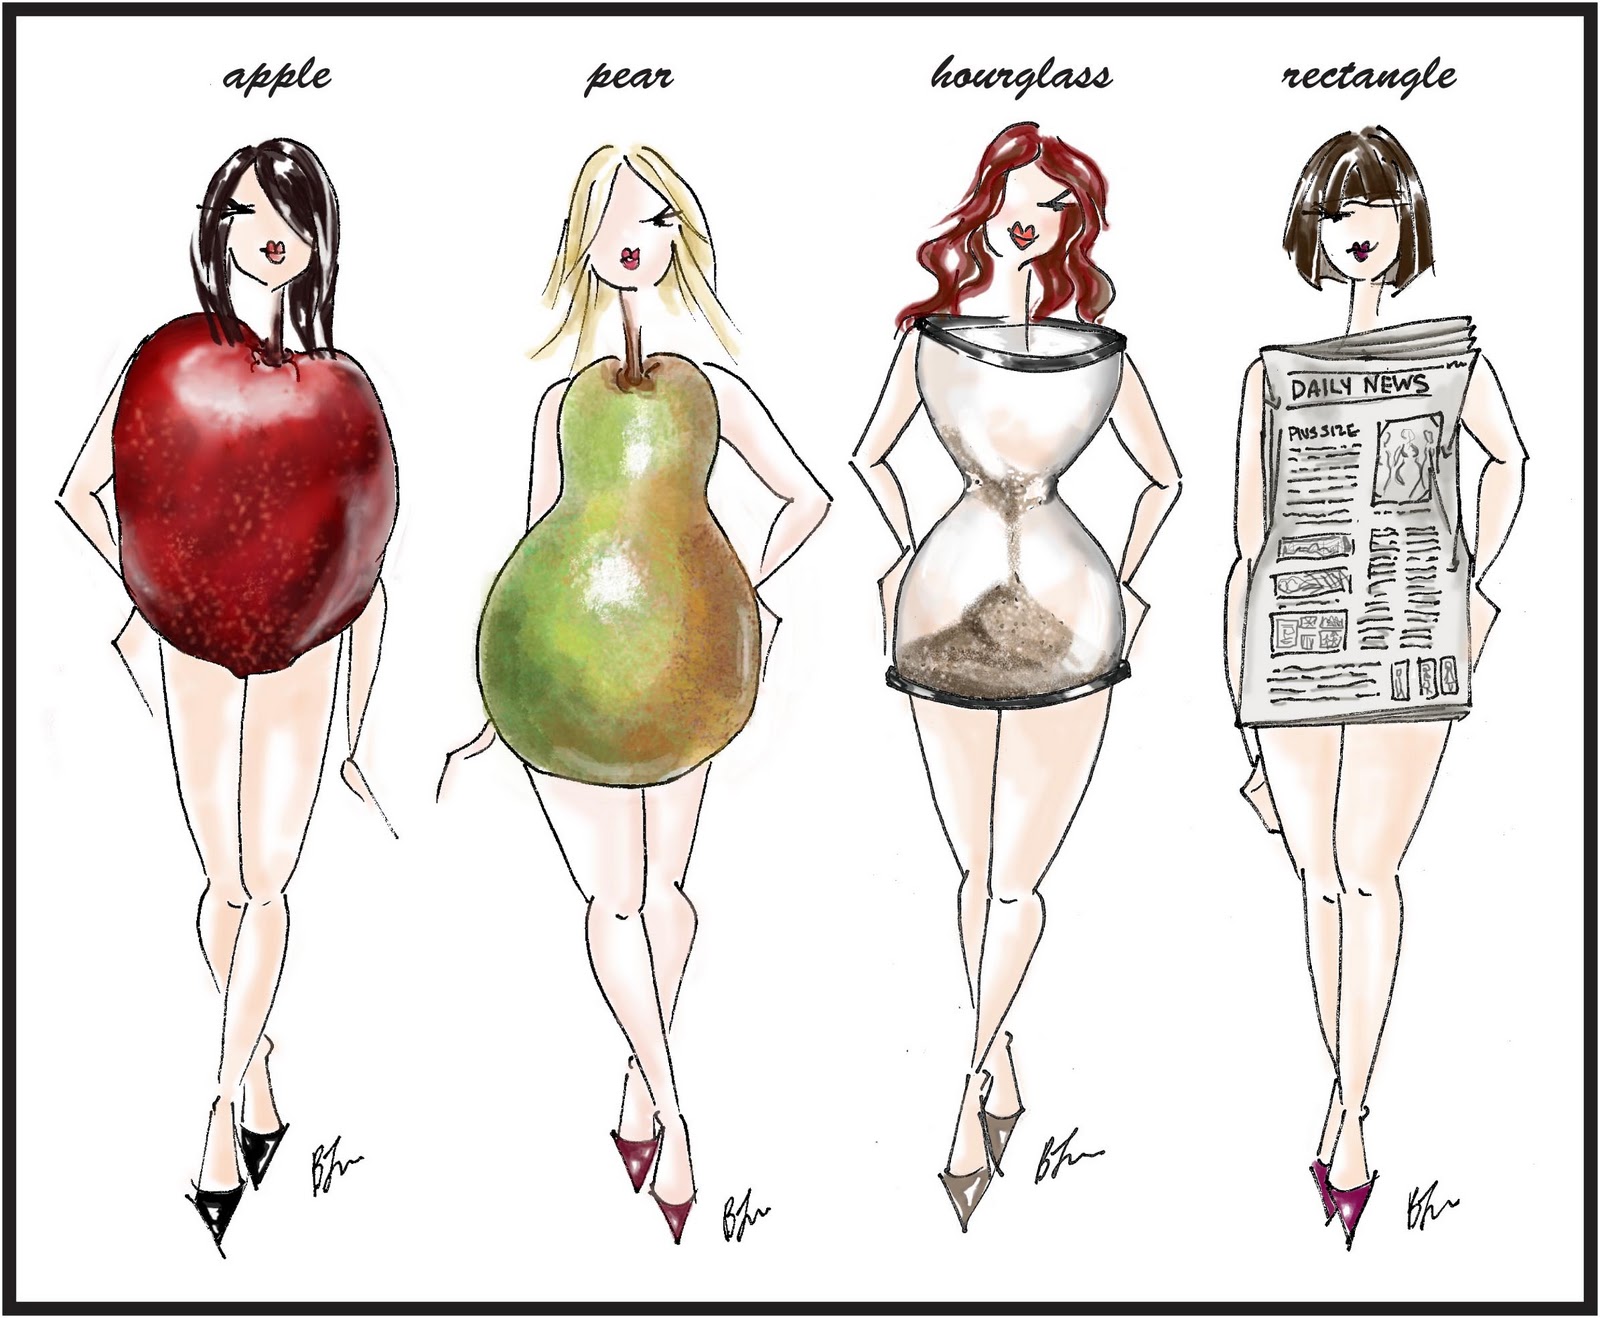 Illustration of four women each of a different body shape, apple, pear, hourglass and rectangle.